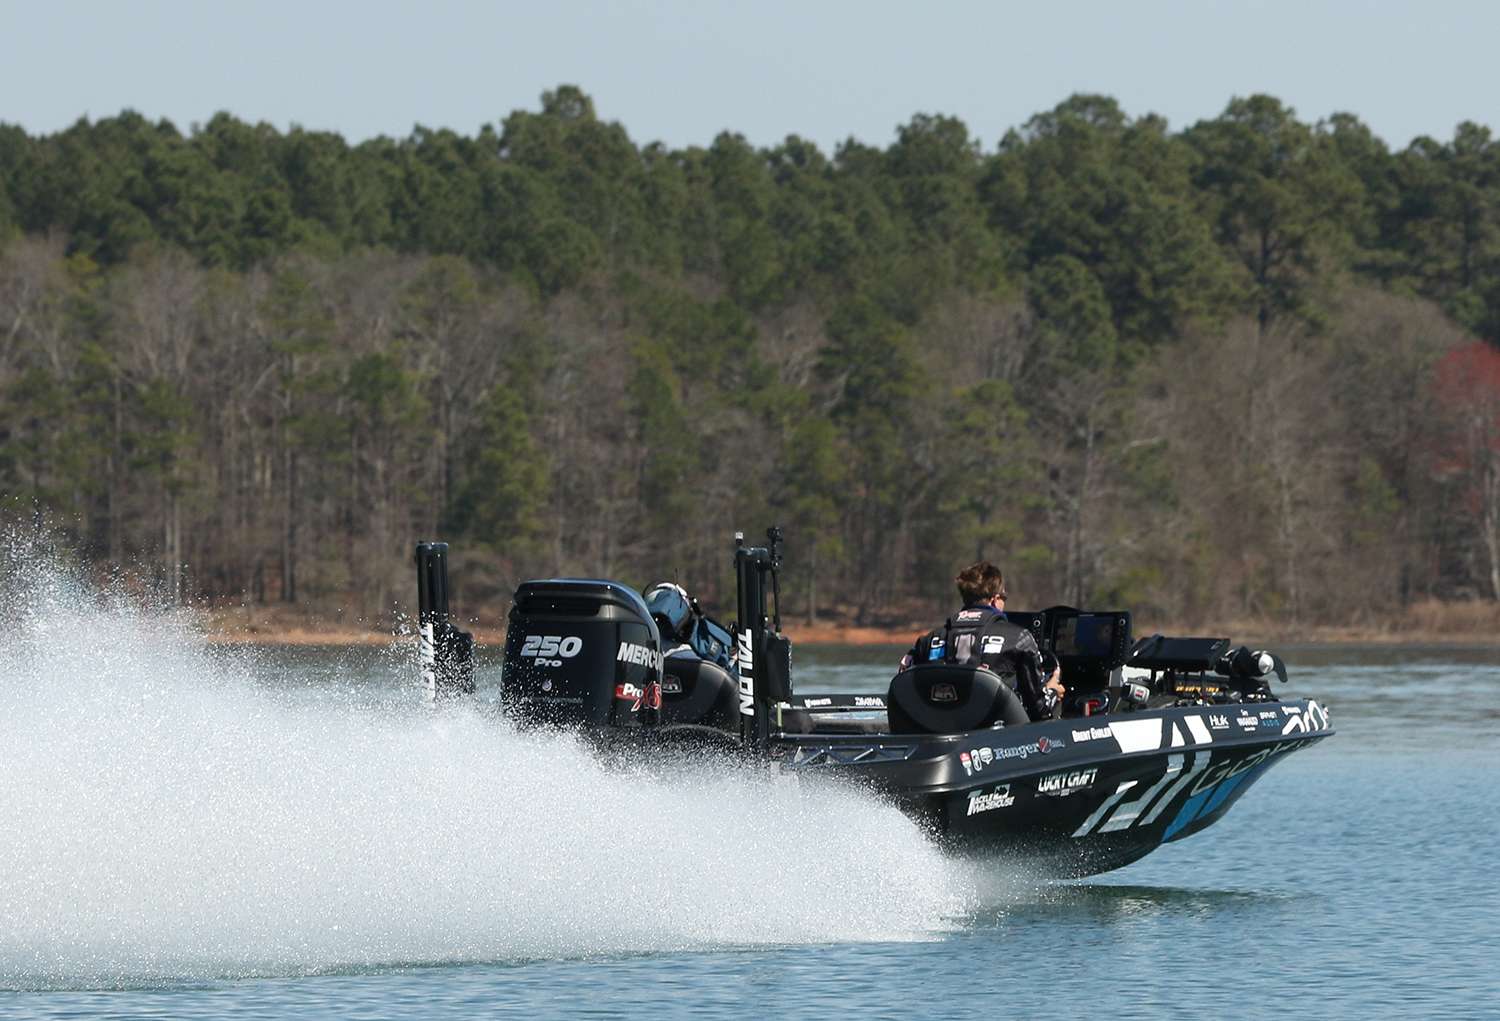 Brent Ehrler had a fantastic Championship Sunday at the 2018 GEICO Bassmaster Classic presented by DICK'S Sporting Goods at Lake Hartwell. Ehrler's day earned him second place for the second straight year in a row.